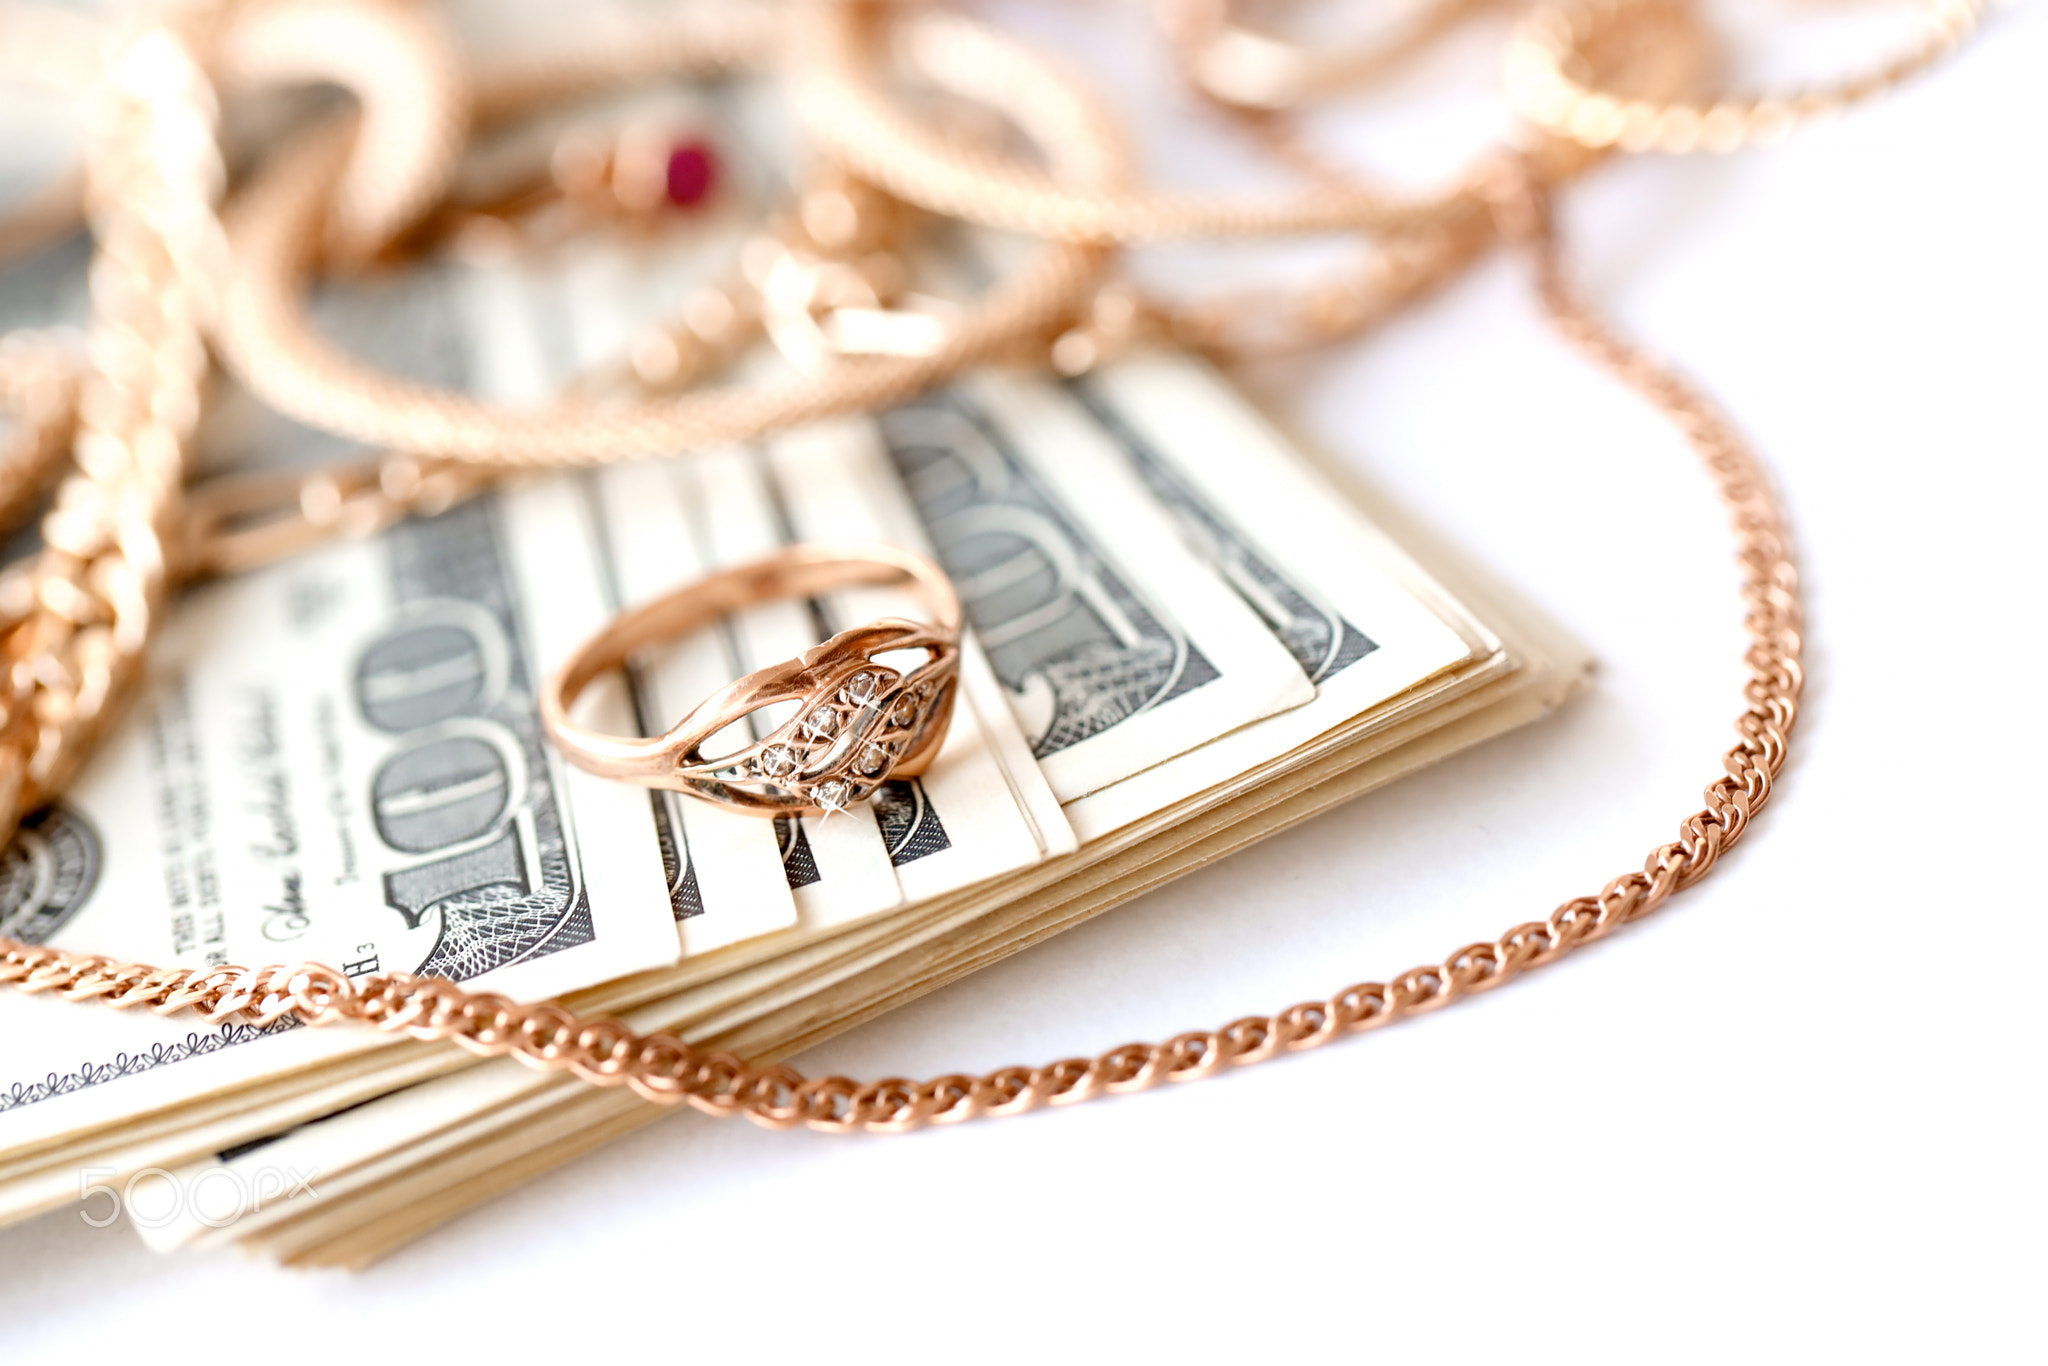 Many expensive golden jewerly rings, earrings and necklaces with big amount of US dollar bills on